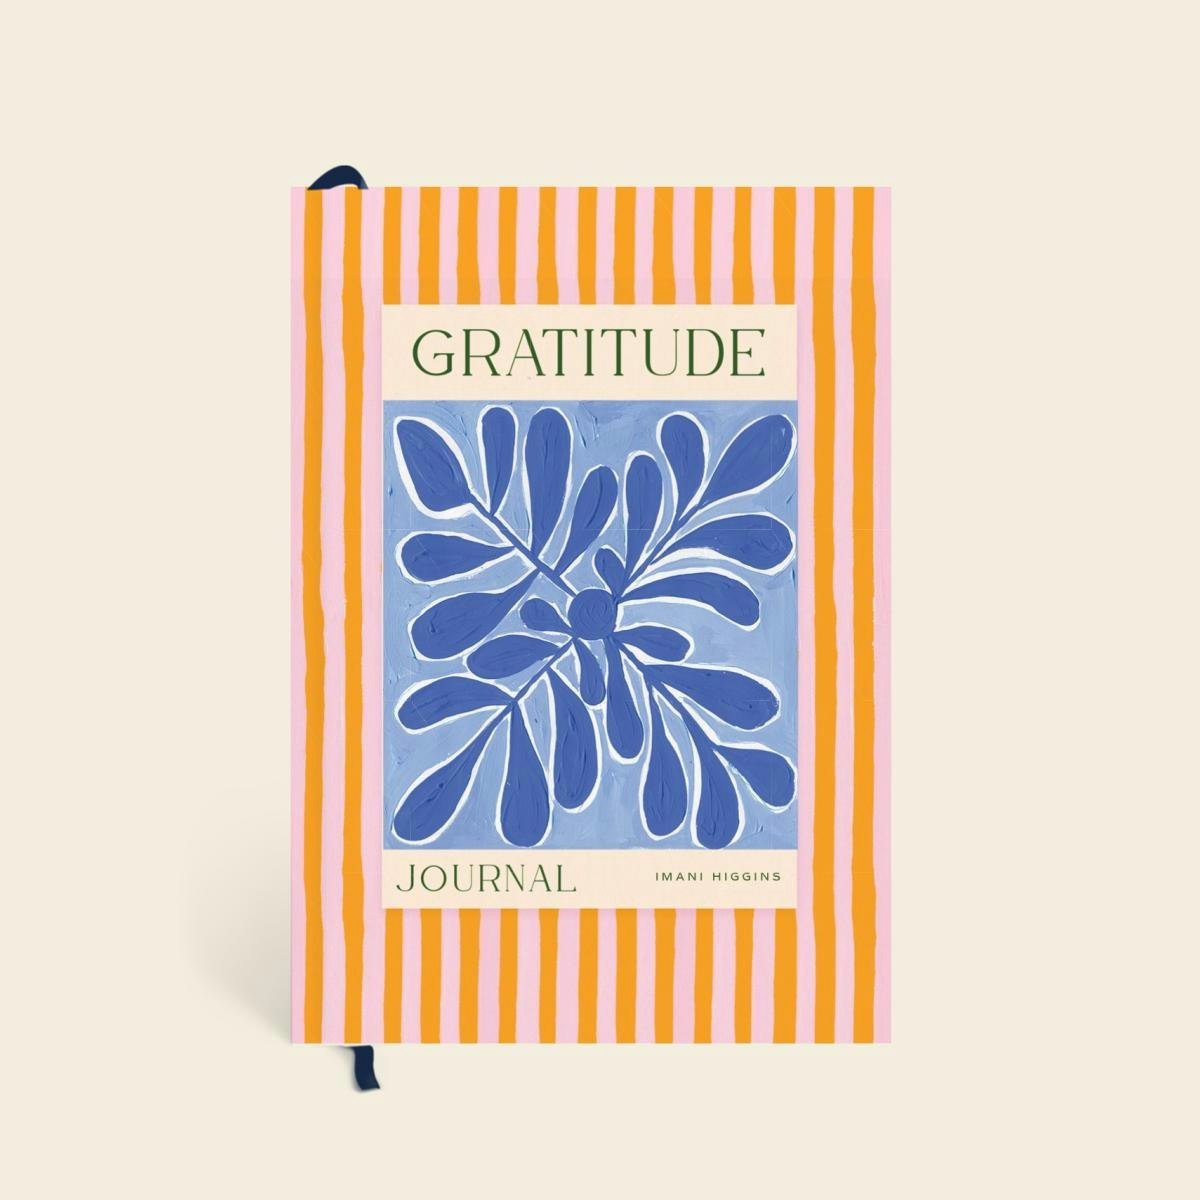 Stay Grounded, Gratitude Journal